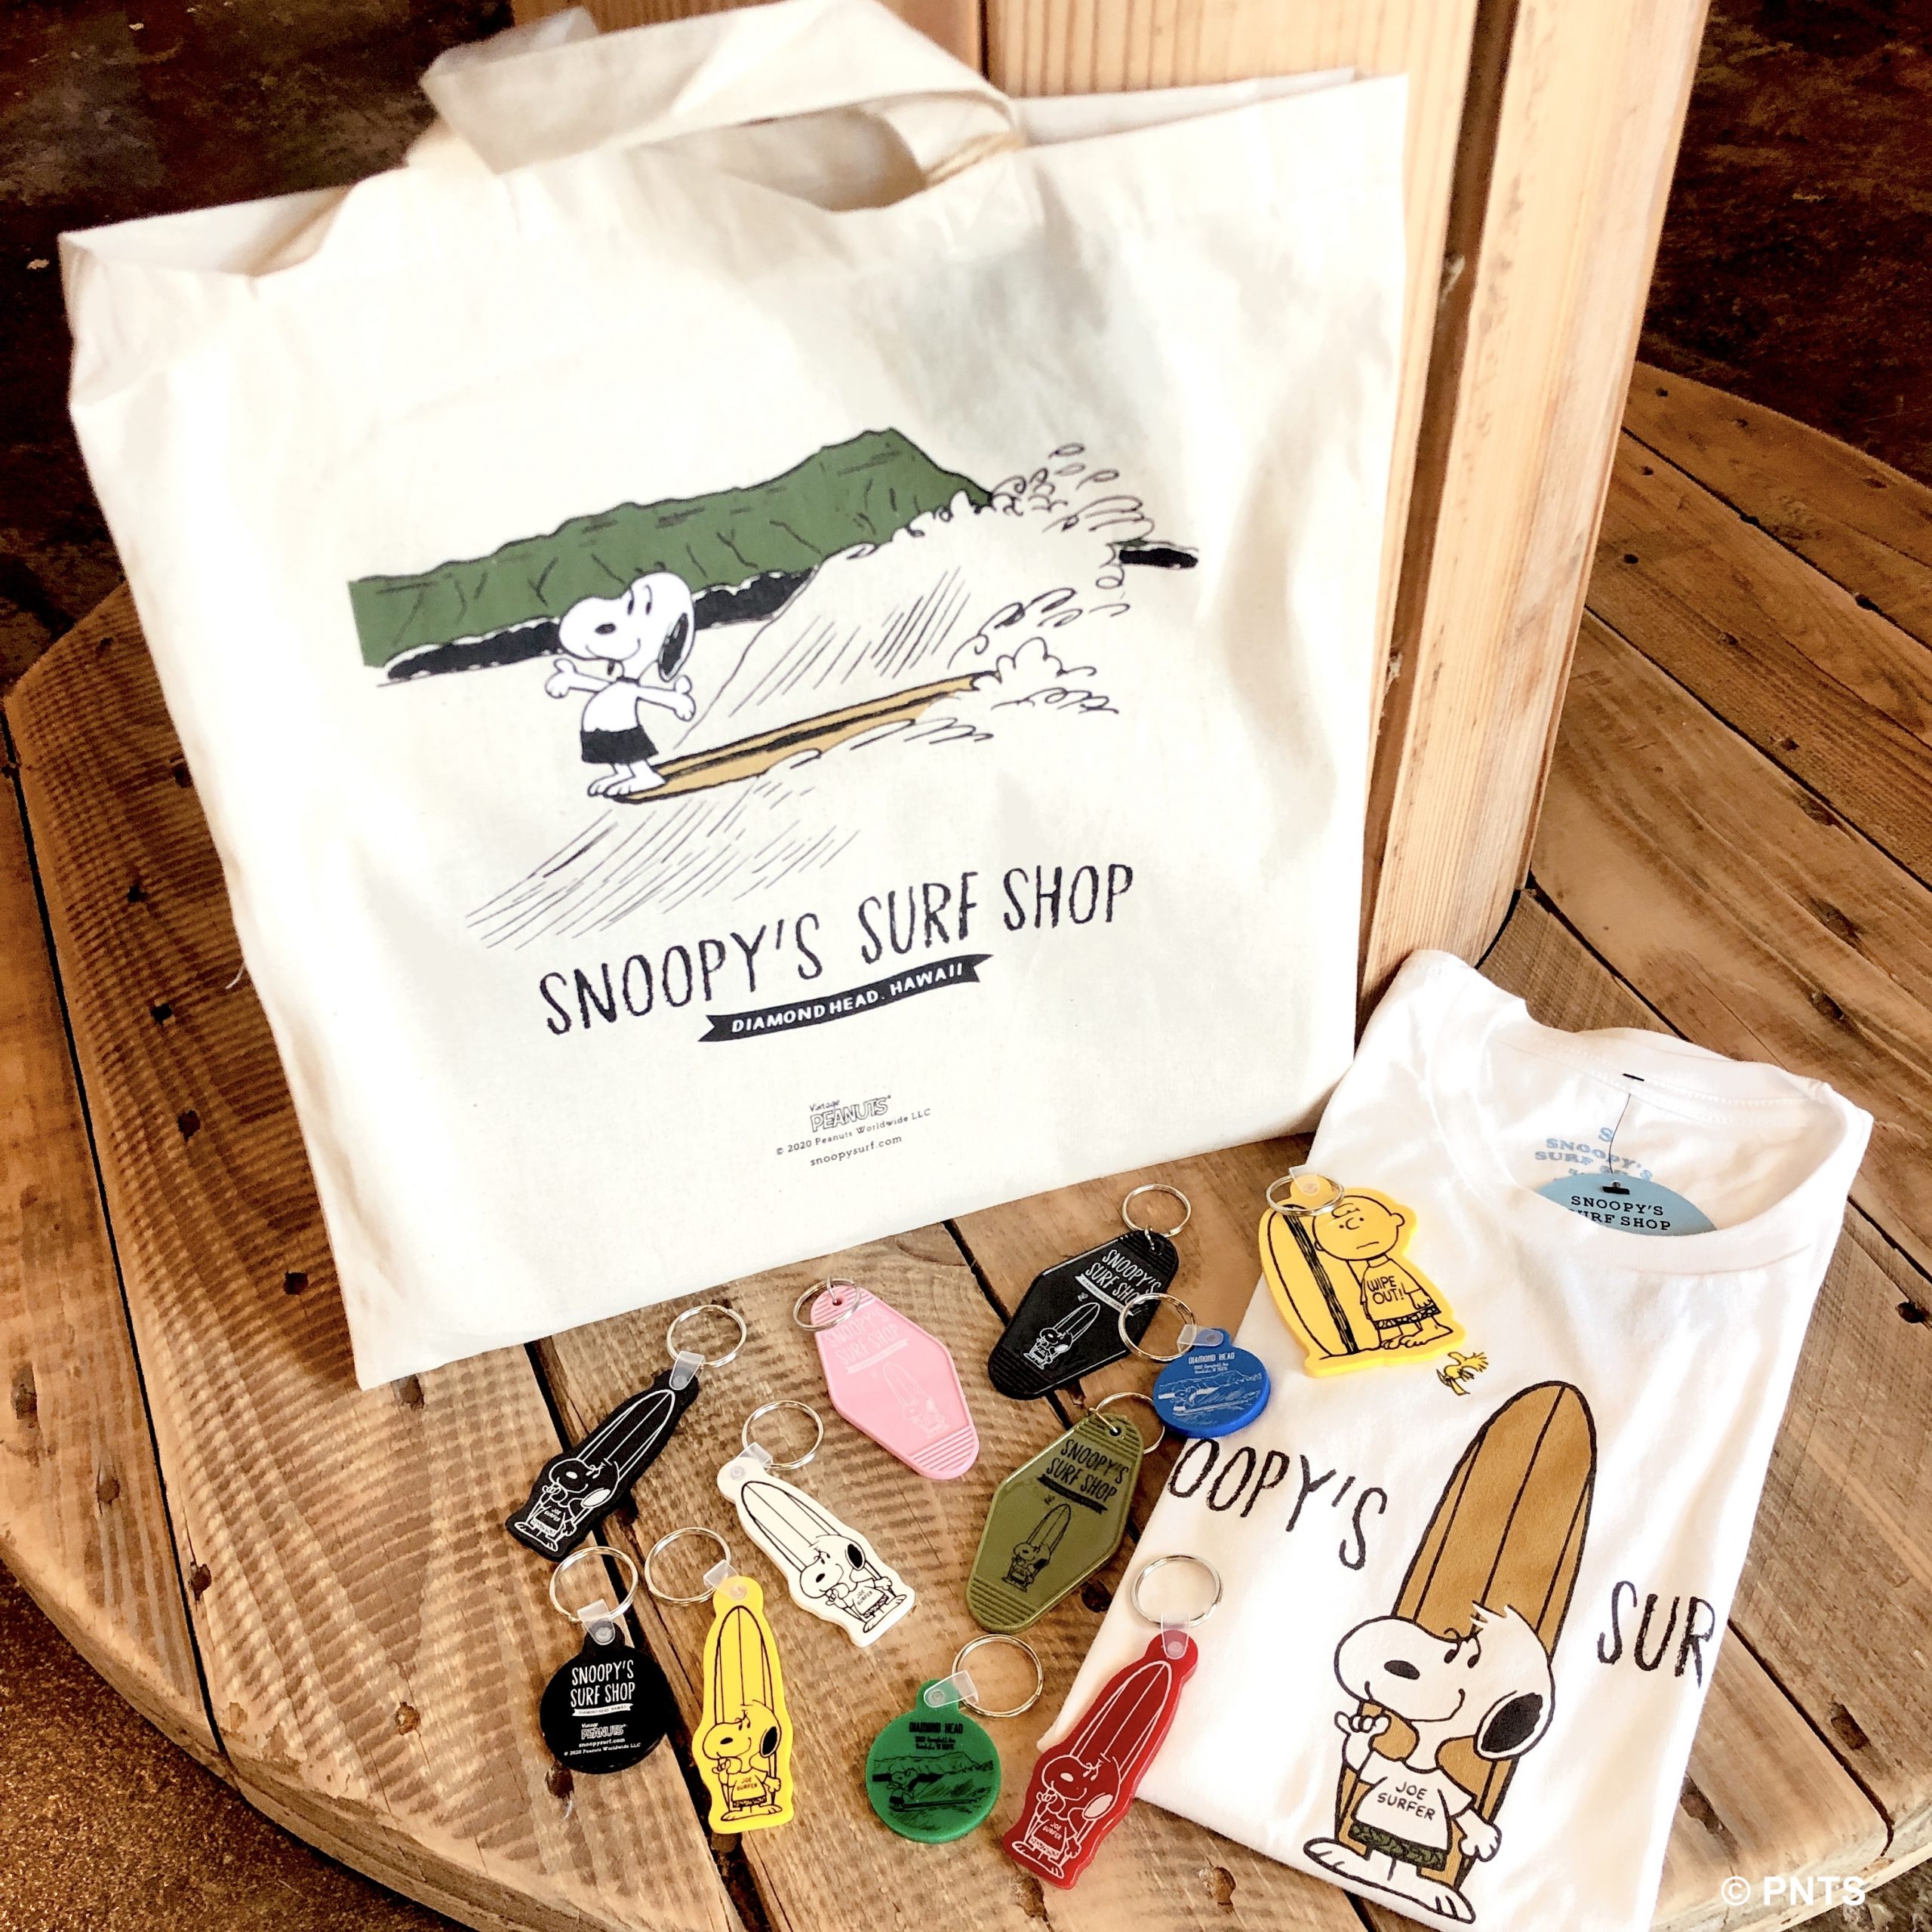 SNOOPY'S SURF SHOPが期間限定でサッポロへ！ | Snoopy's Surf Shop